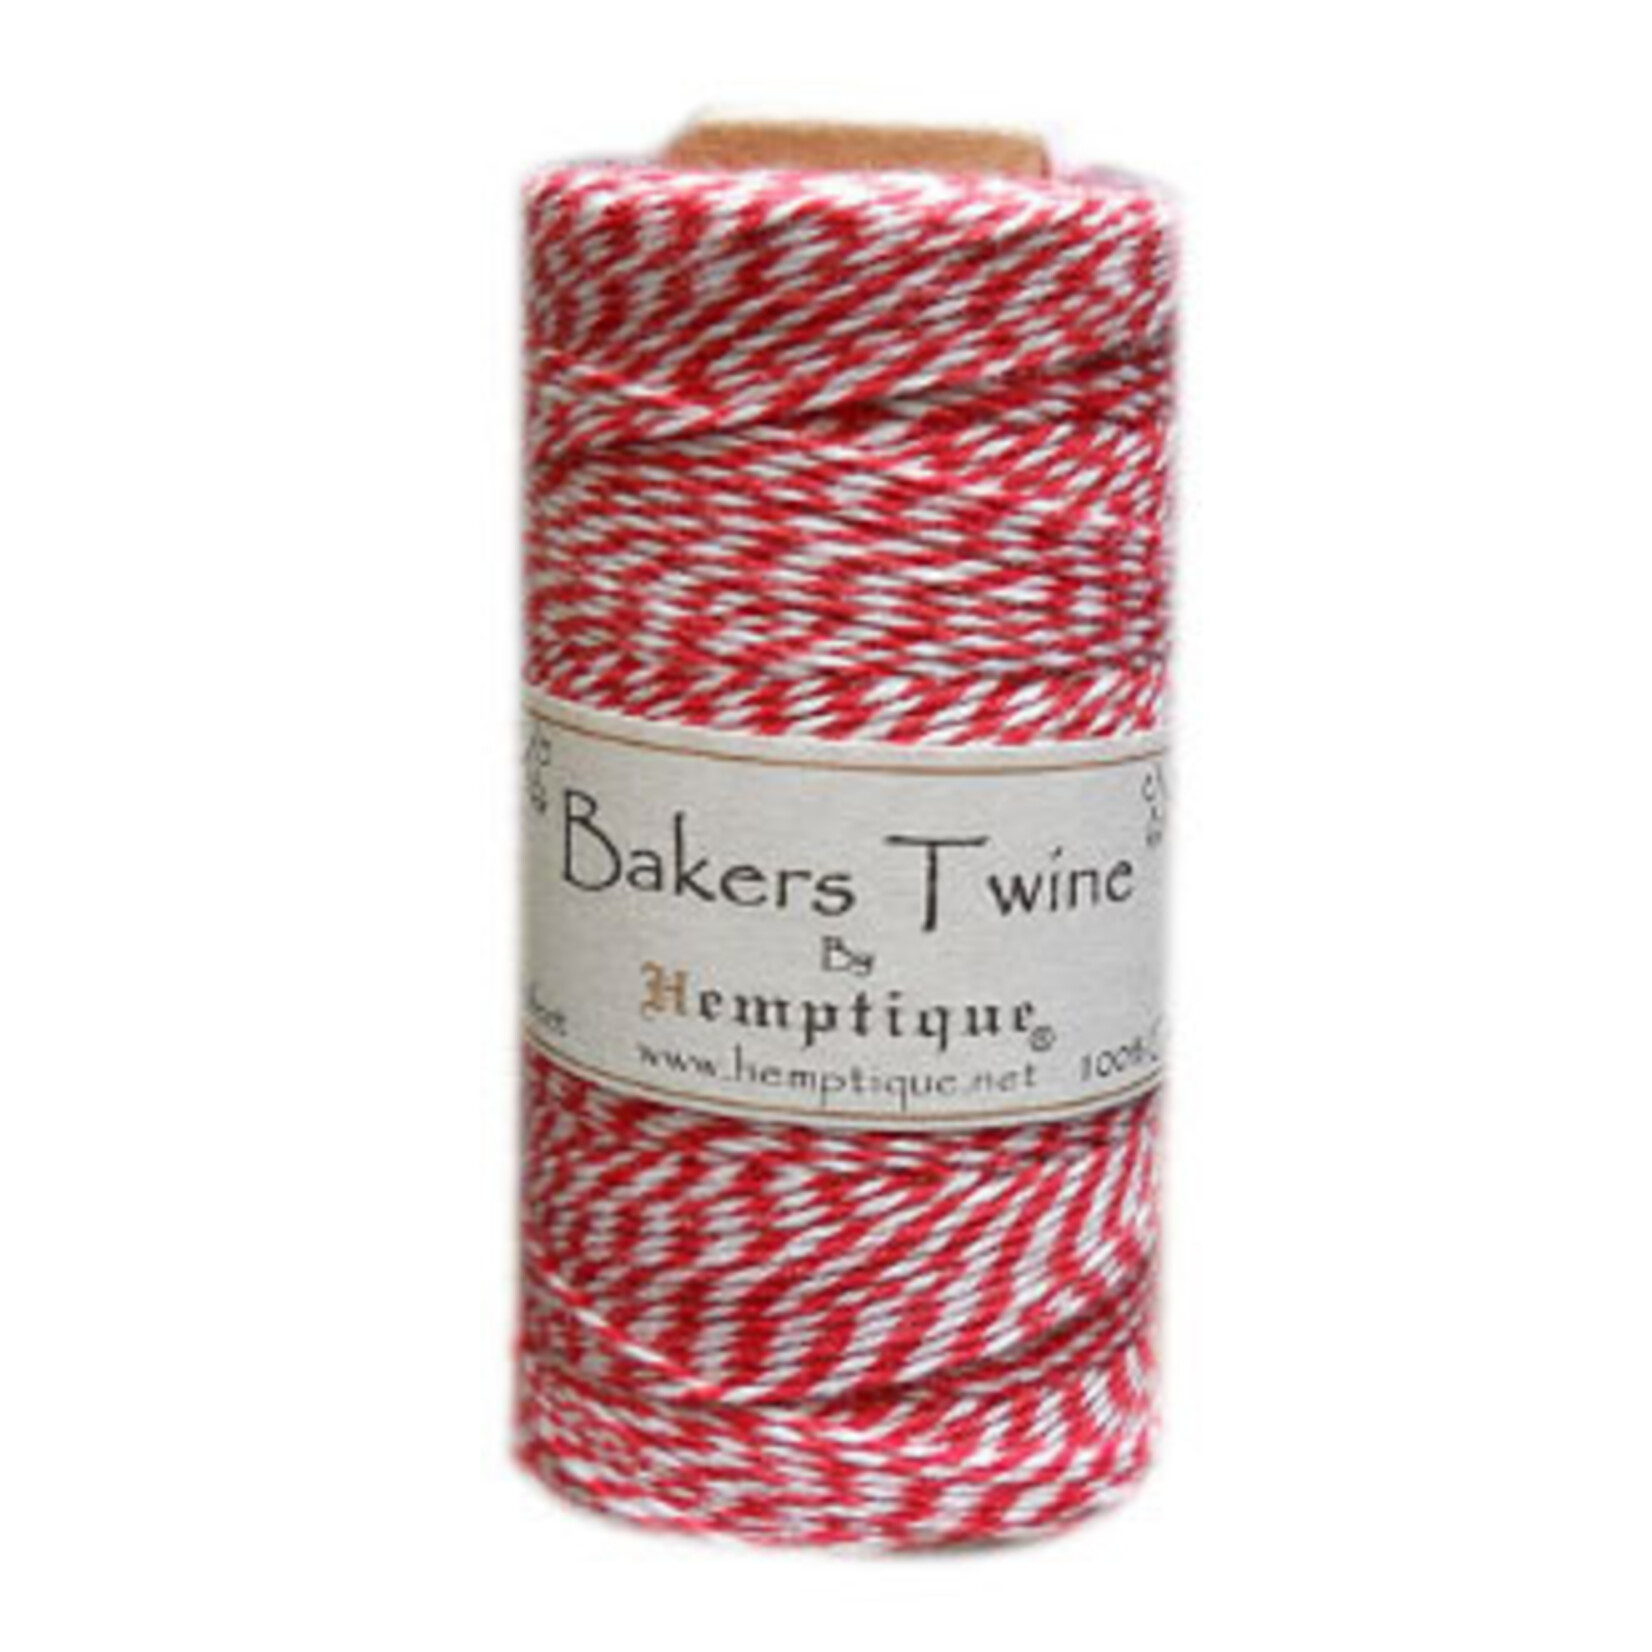 Hemptique Bakers Twine 410Ft Red / White